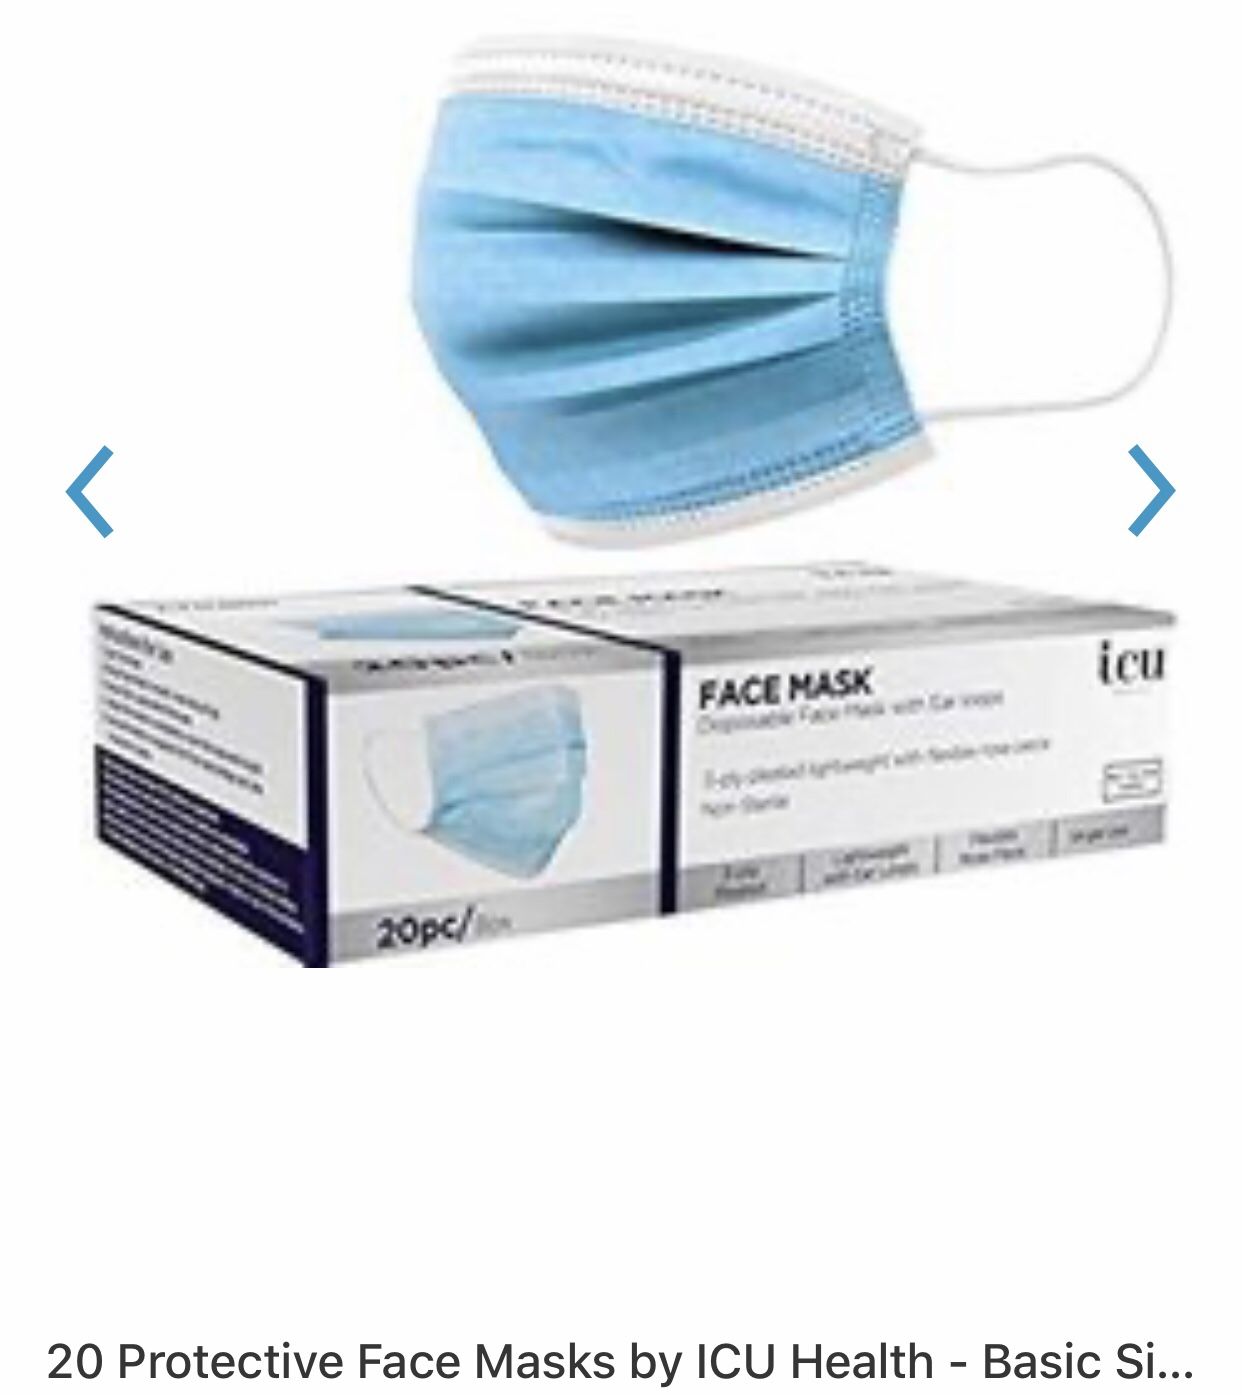 New box of 20 pc disposable protective face masks by ICU Health